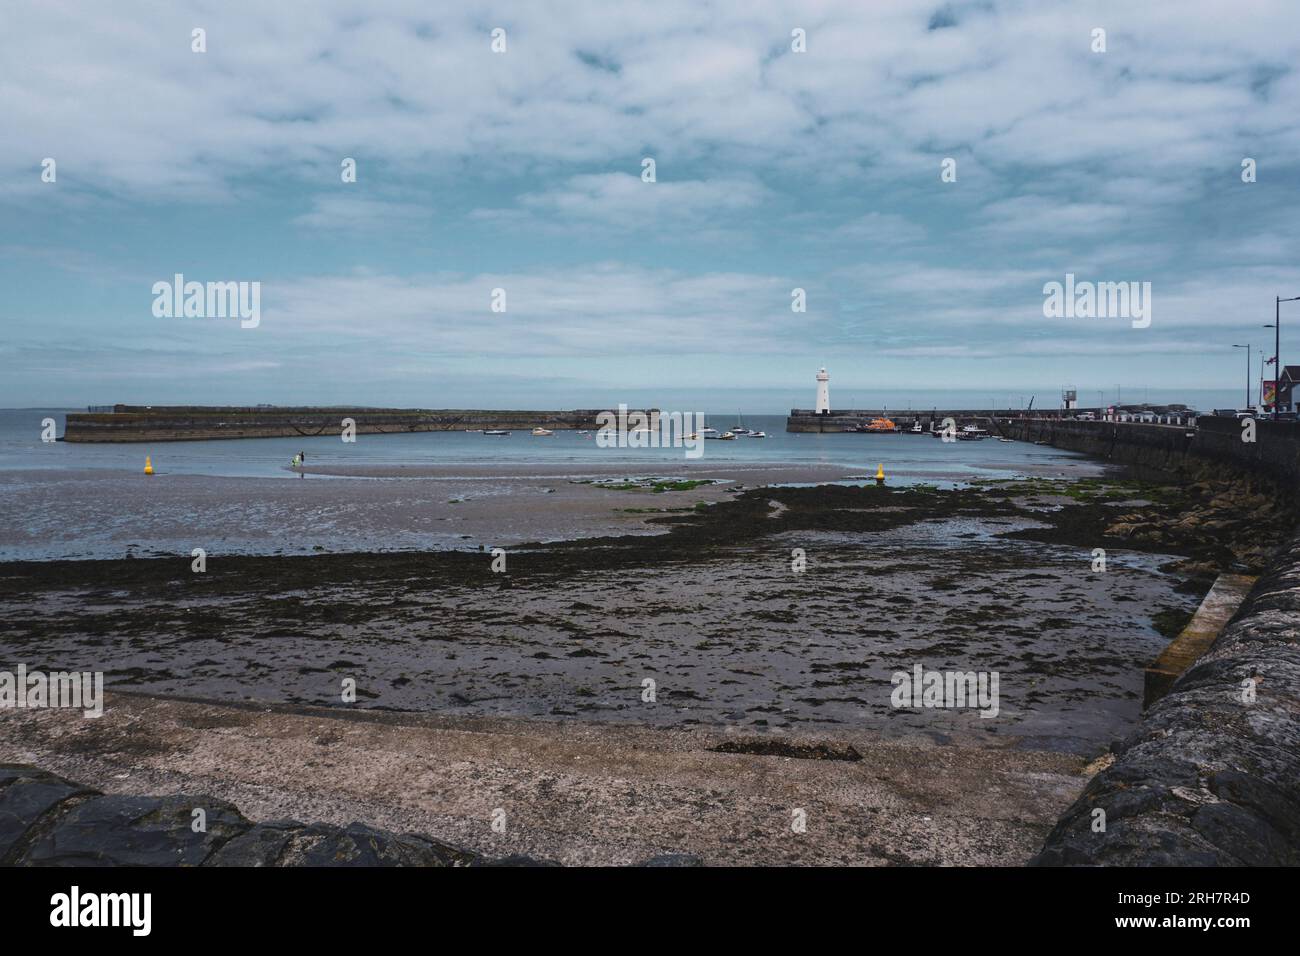 The beachfront in Donaghadee, County Down, Northern Ireland with the well known landmark white lighthouse in the distance. Stock Photo